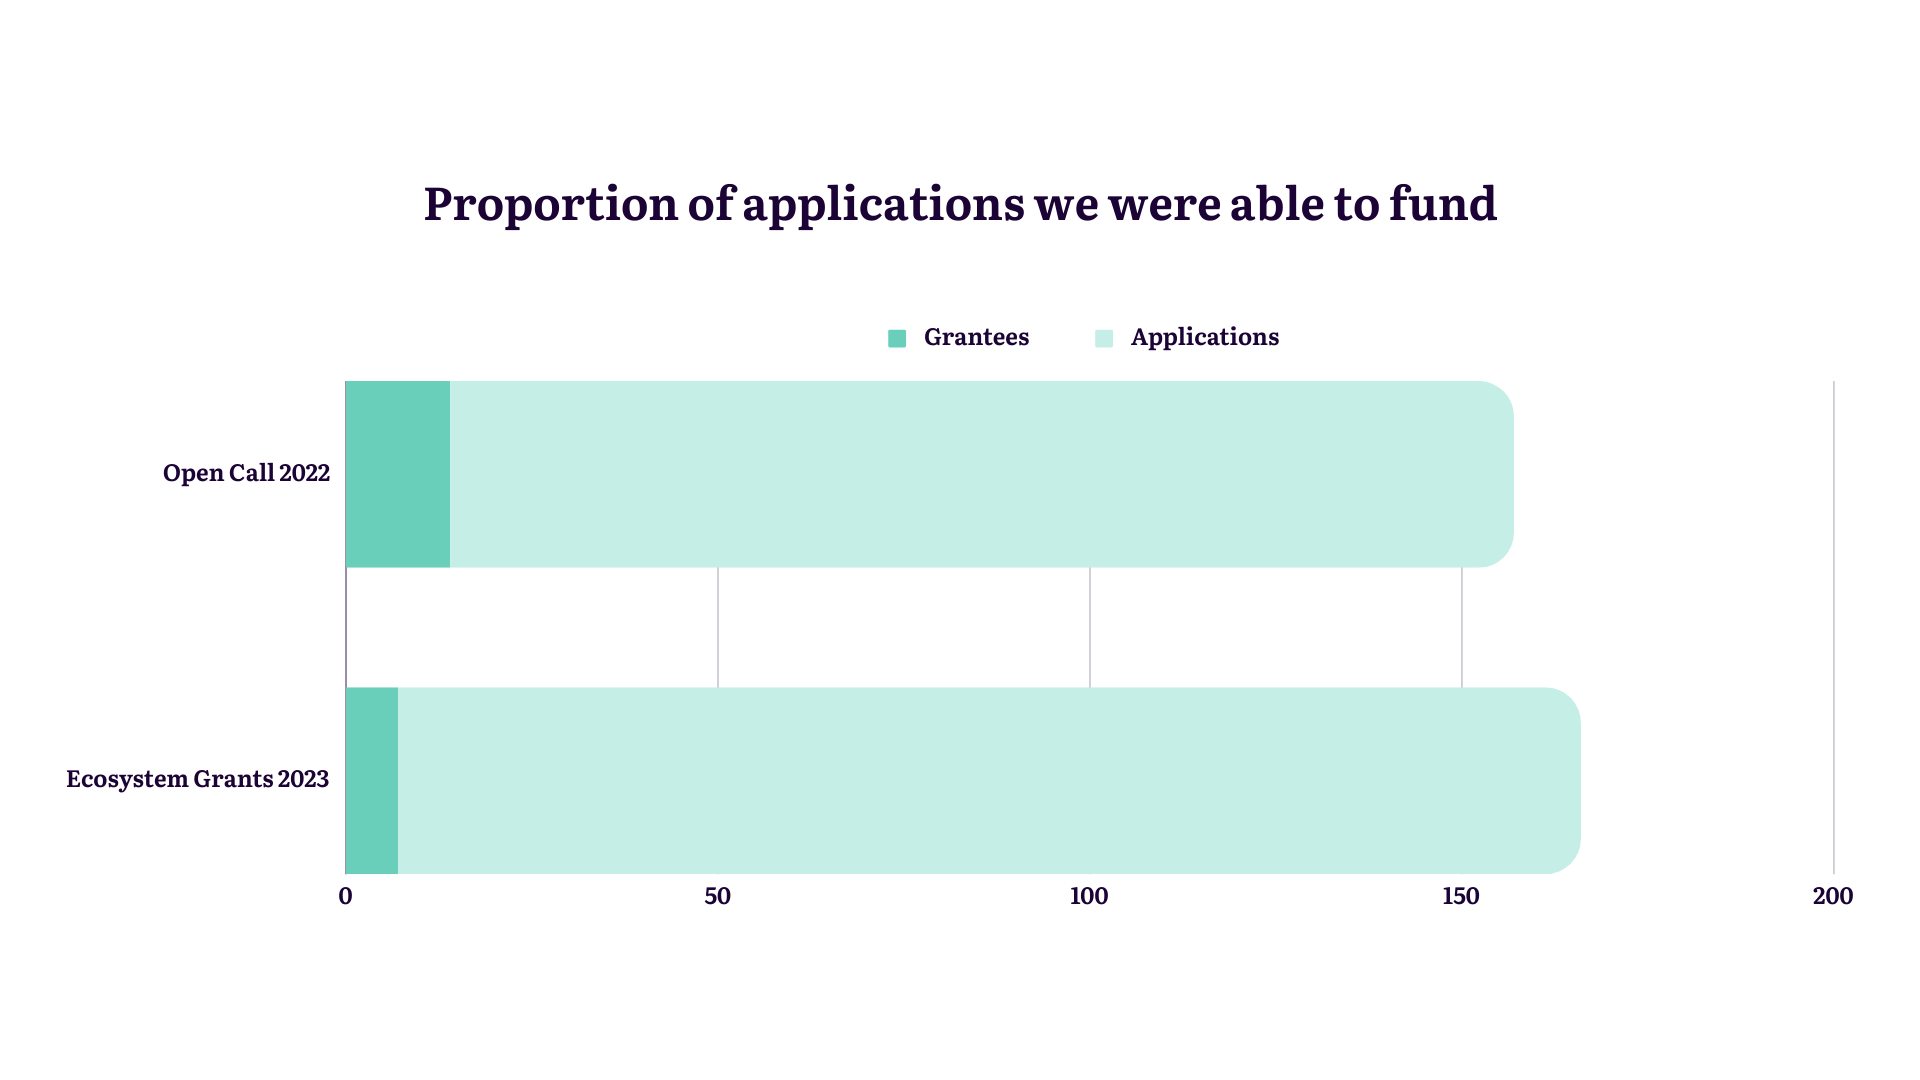 The graph shows a stacked row chart with two columns, comparing the number of applications and awarded grants for two of our latest grant calls - the Open Call 2022 (143 applications; 14 awarded grants) and the Ecosystem Grants call in 2023 (159 applications; 7 awarded grants). 